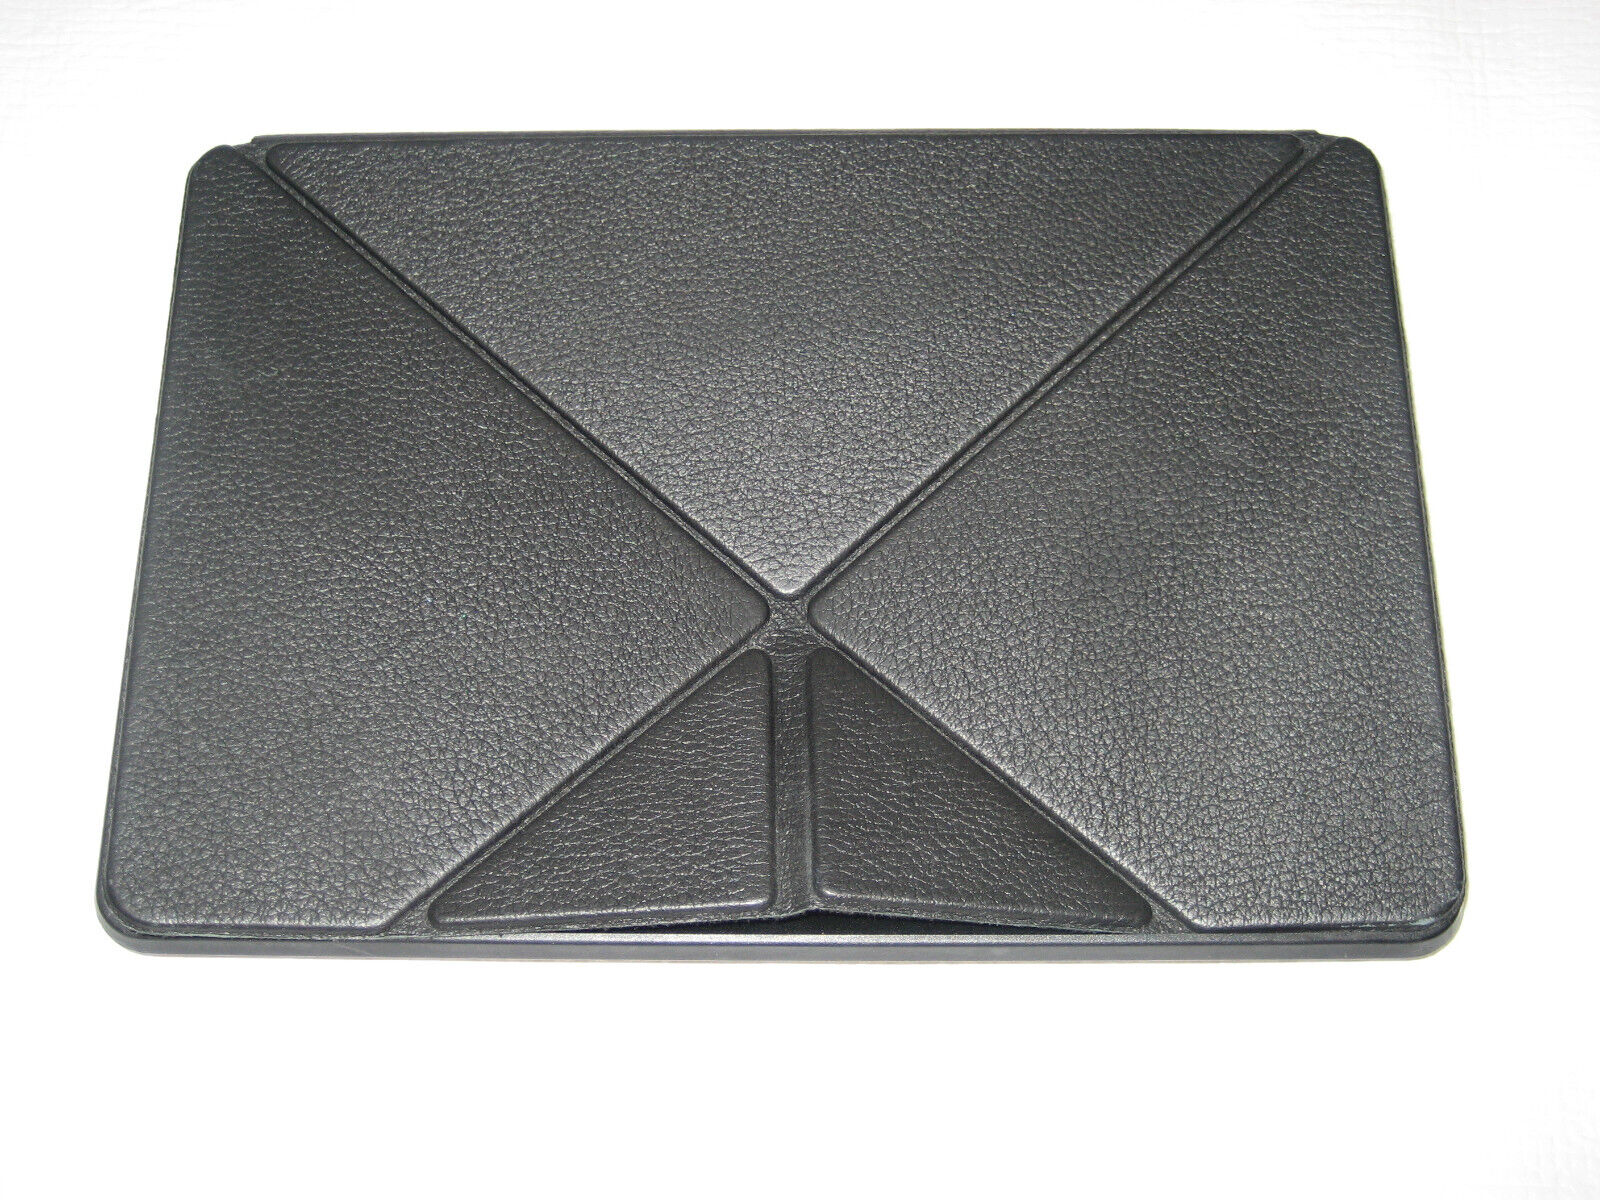 Original Amazon Leather Cover Case for Kindle Fire HD 7 3rd Gen Tablet - P48WVB4